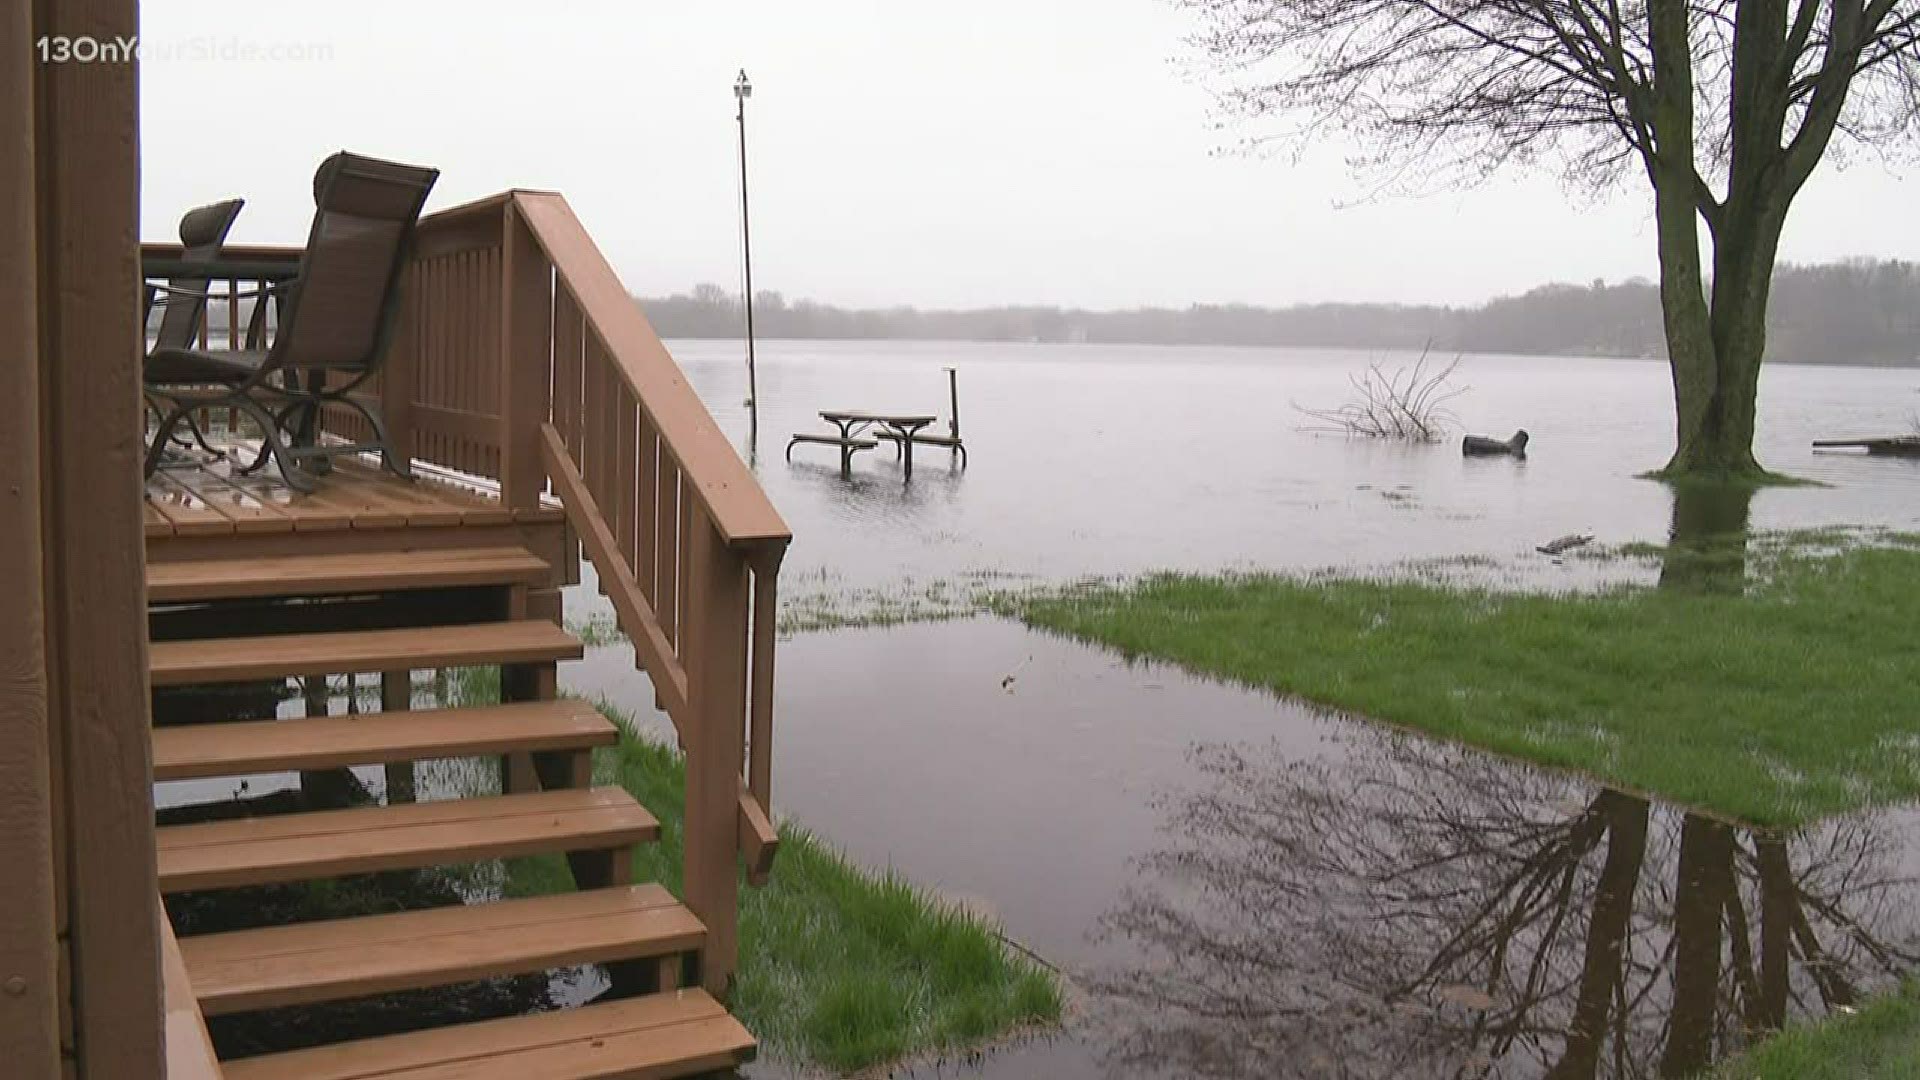 Four inches of rain fell on the Muskegon over the past few days, which has led to flooding across the county.